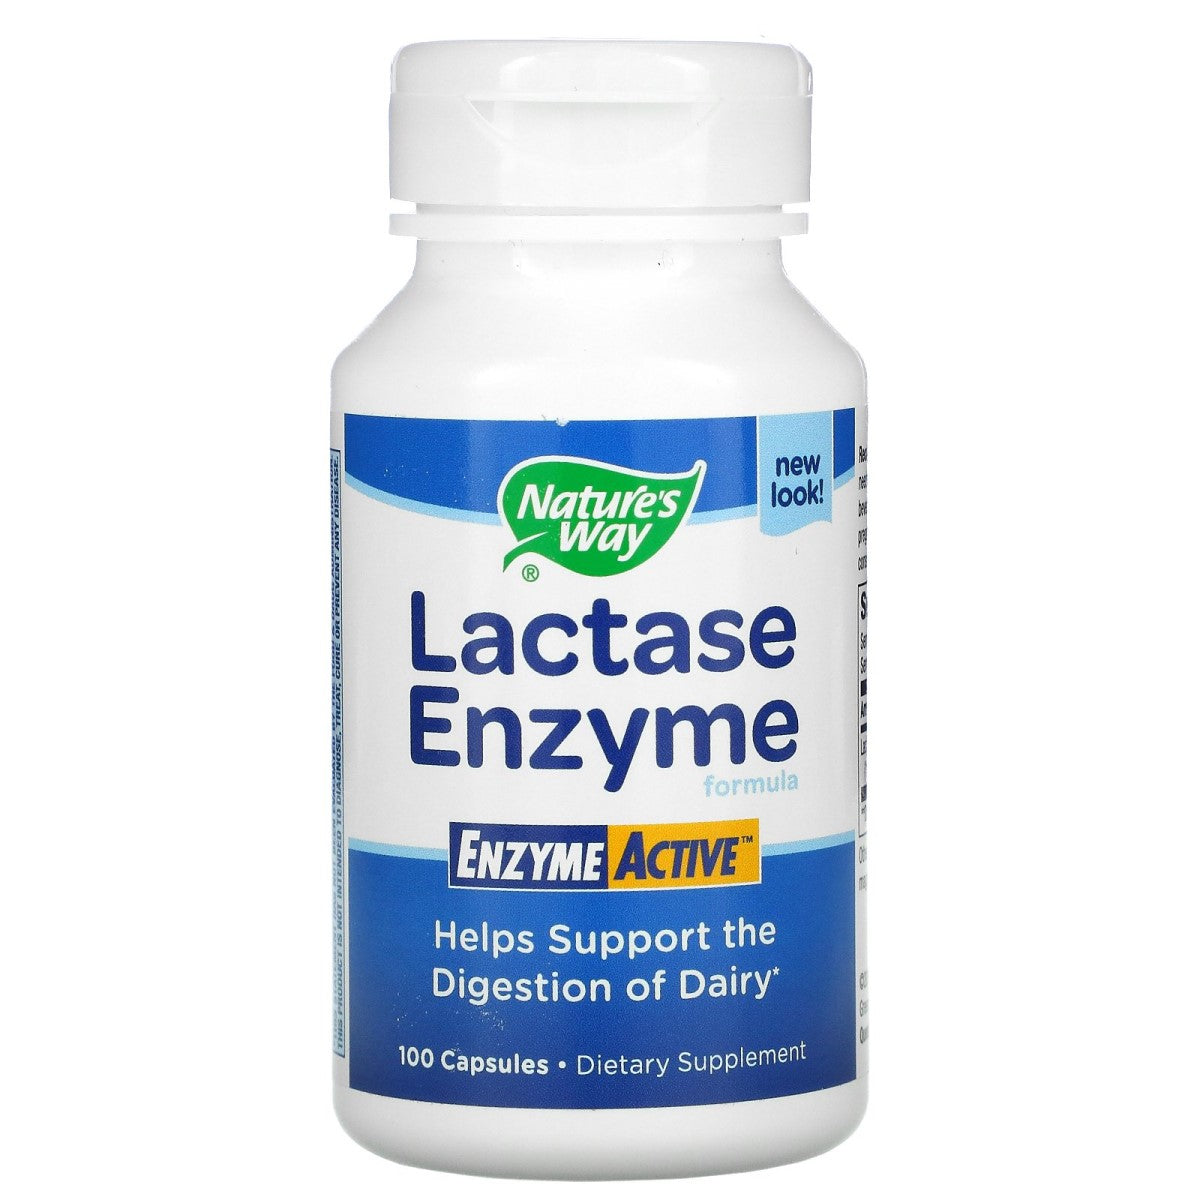 Primary image of Lactase Enzyme